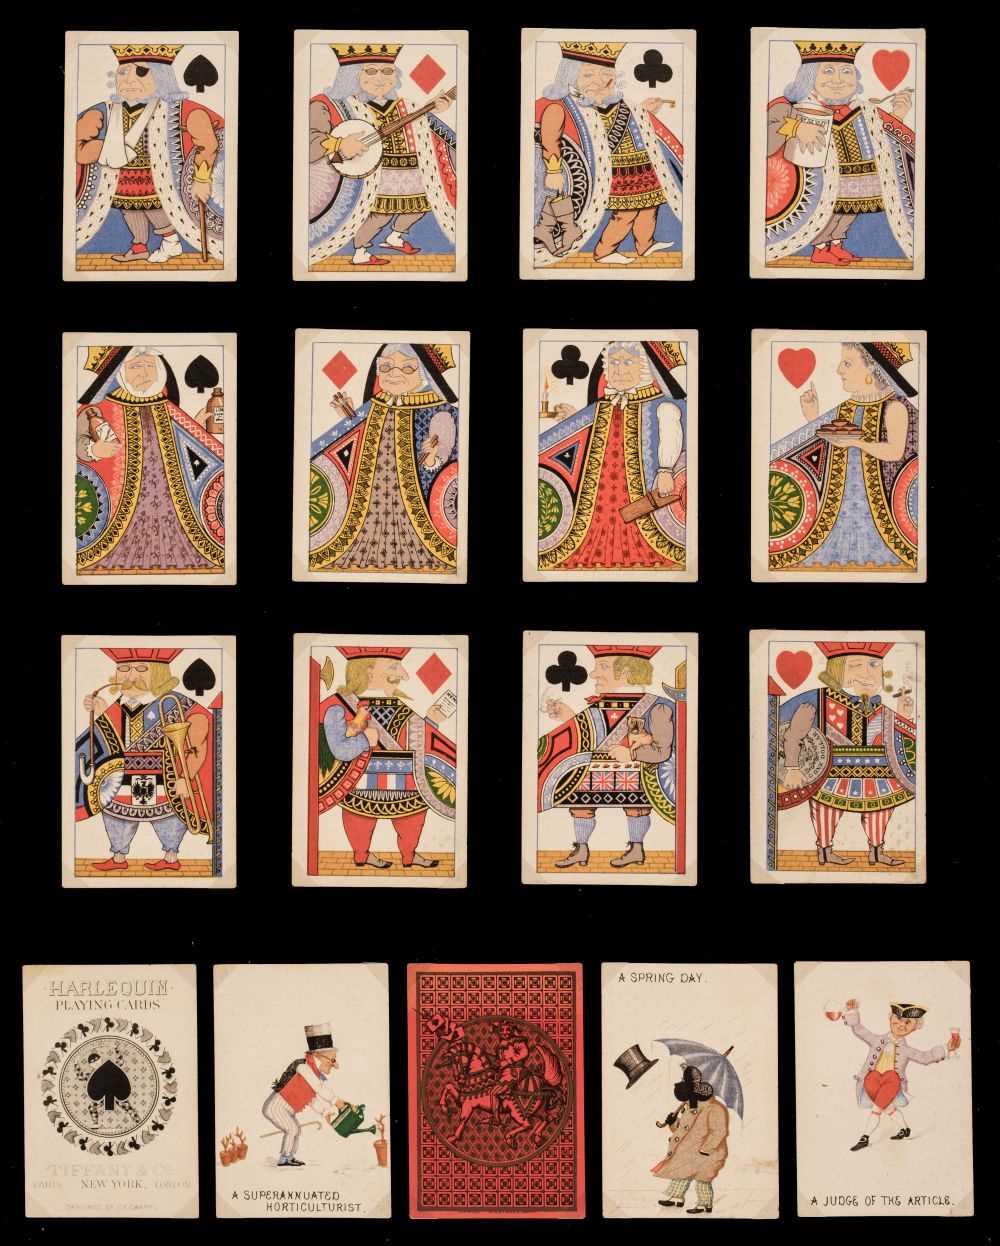 Lot 511 - American transformation cards. Tiffany Harlequin playing cards, C.E. Carryl for Tiffany & Co., 1879